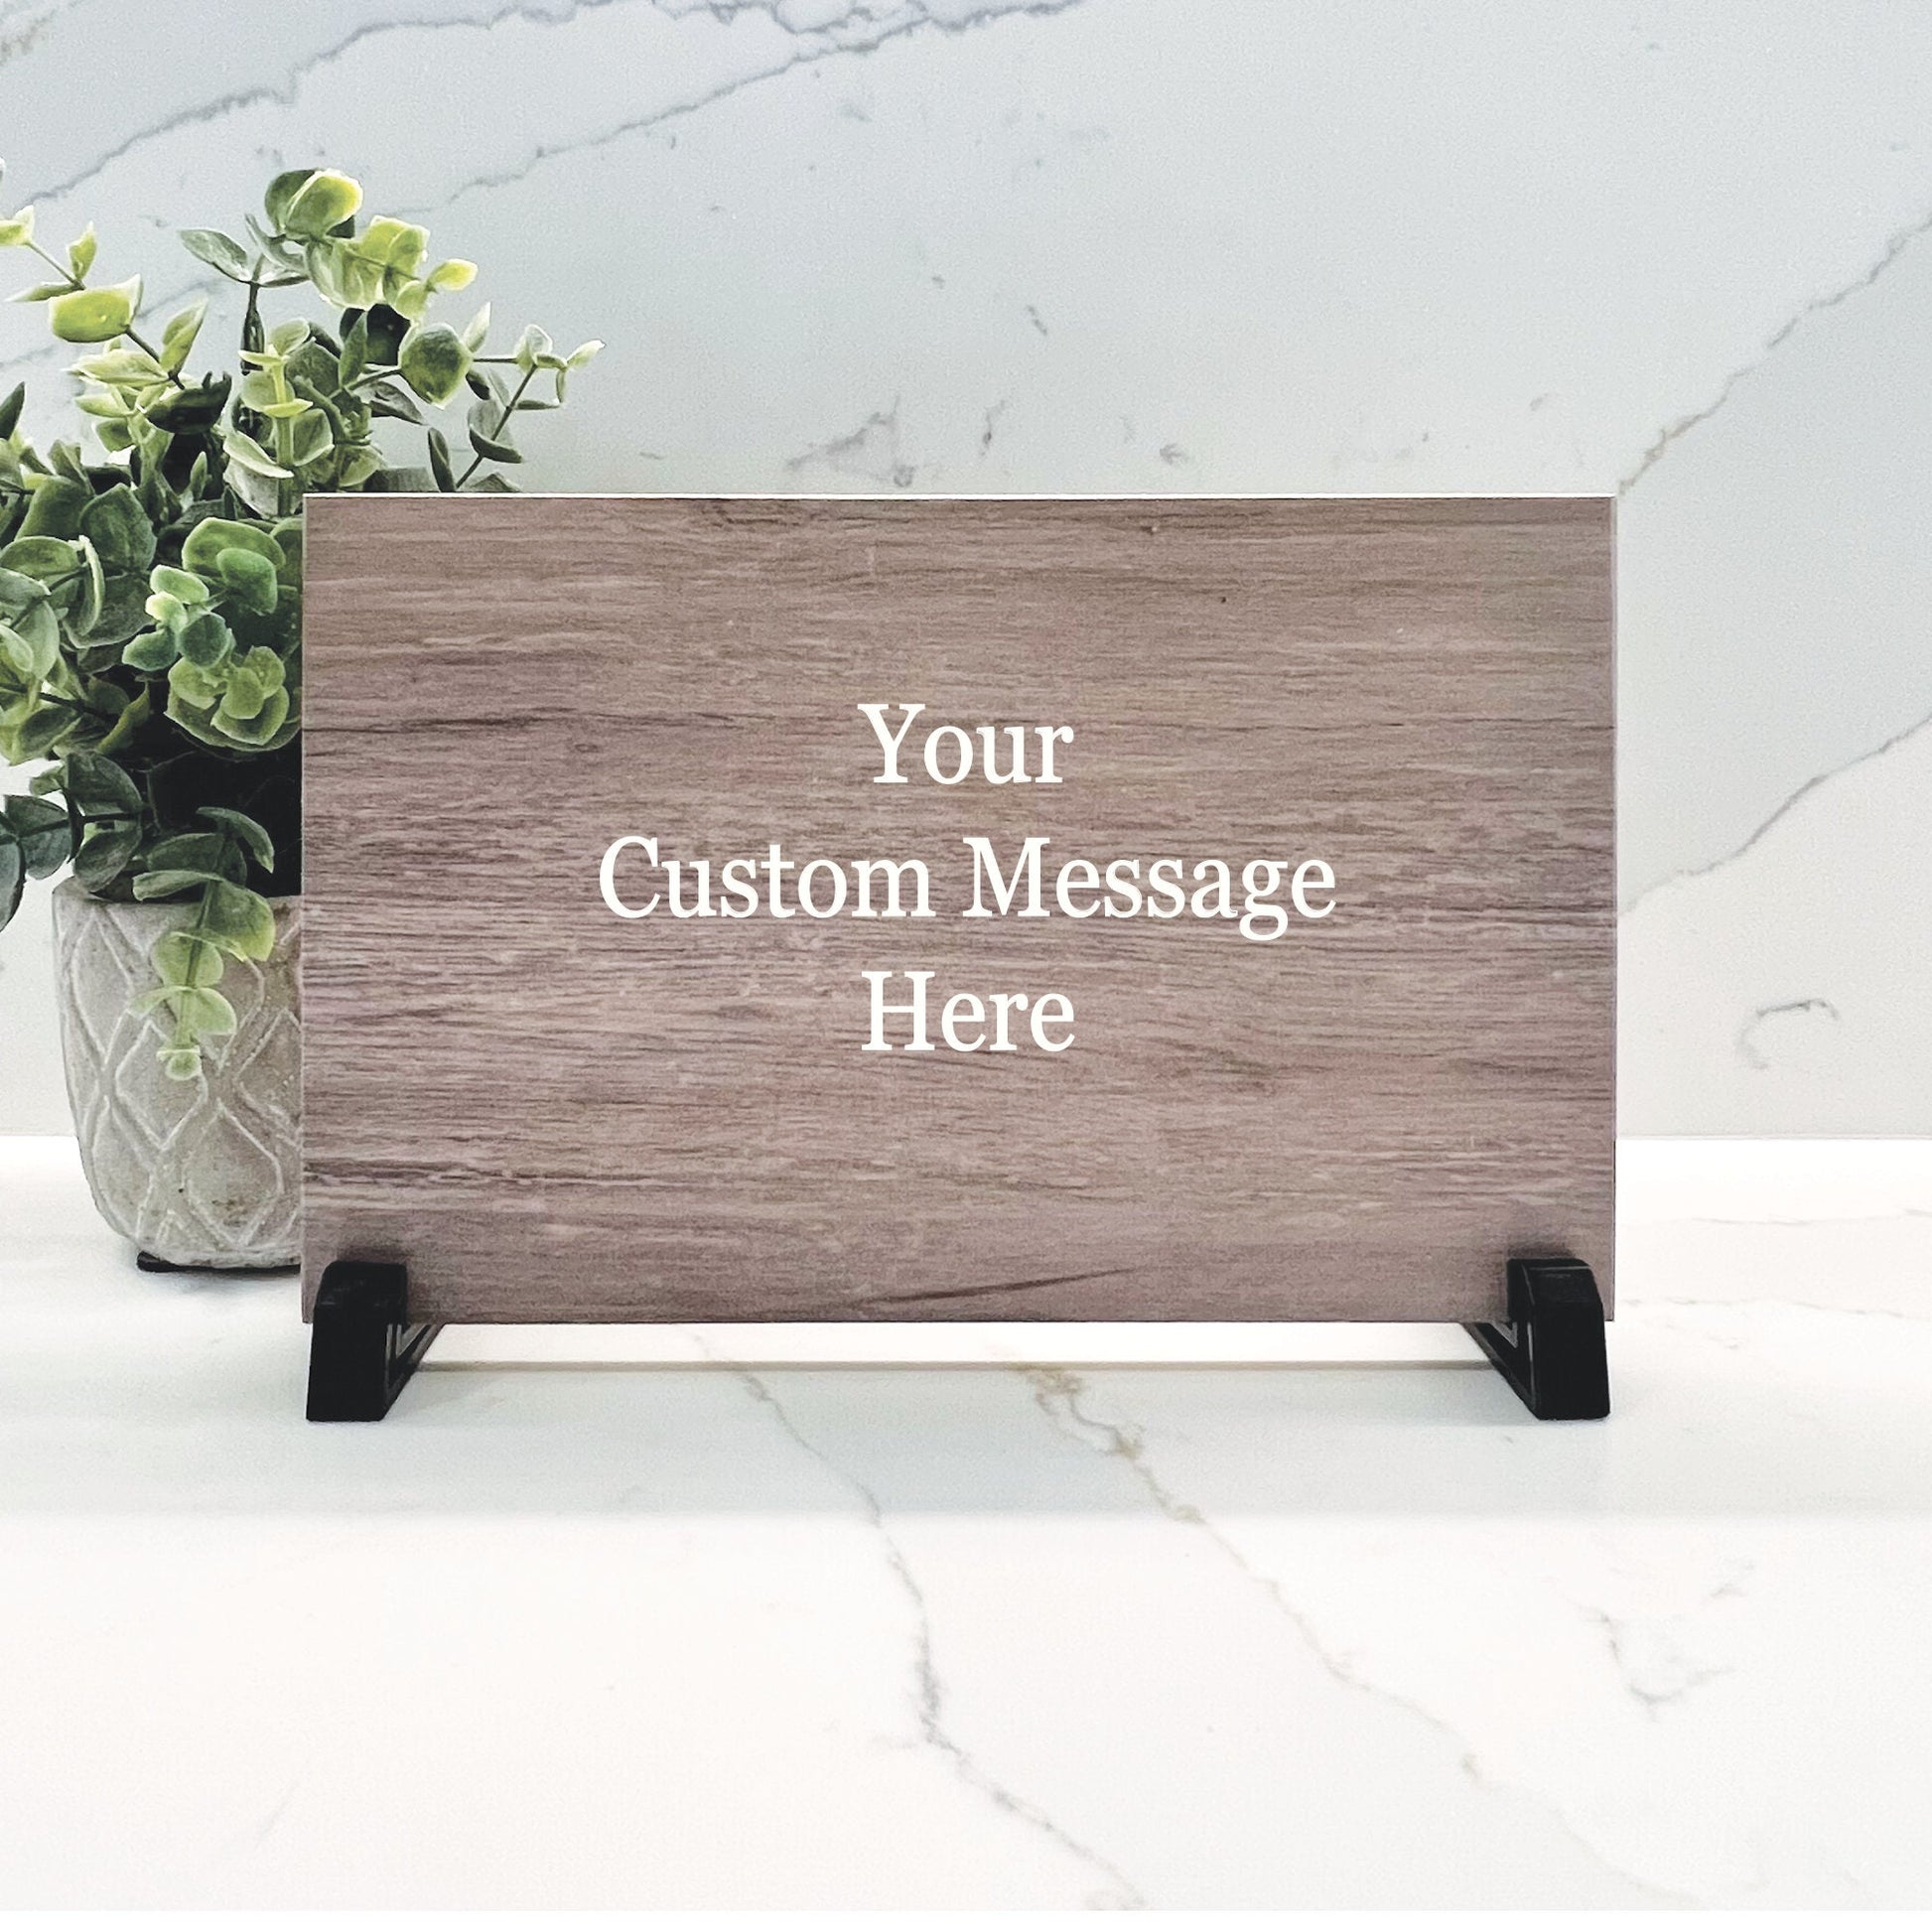 Personalized Wood Sign - Custom 8.5"x5.5" Wood Sign with stand, Choice of Wording & Font, Personalized Gift for any occasion